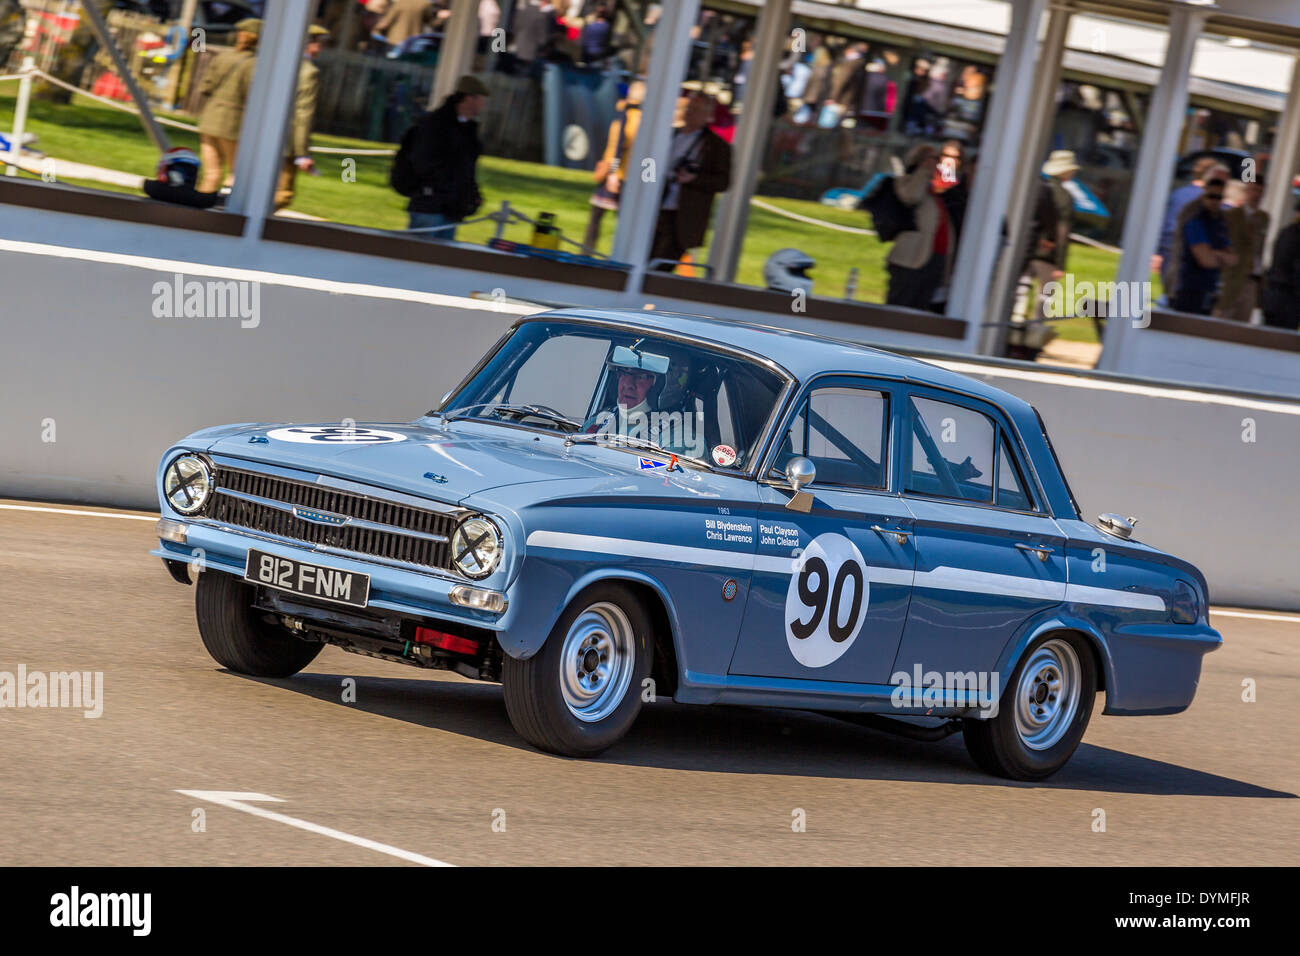 1963 Vauxhall VX 4/90 with driver Paul Clayson during the Sears Trophy race. 72nd Goodwood Members meeting, Sussex, UK. Stock Photo